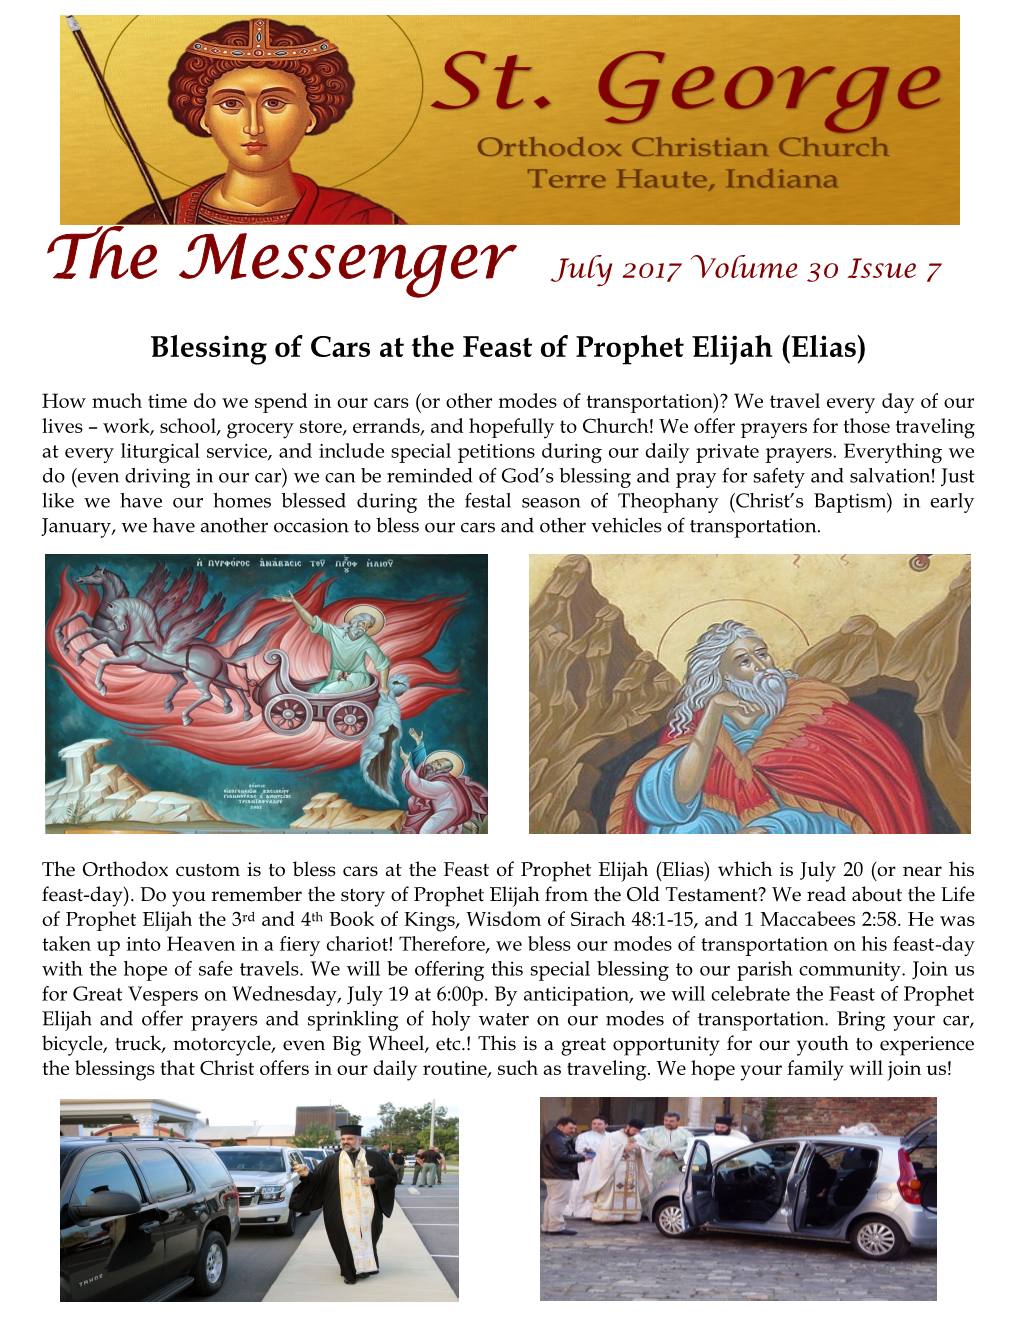 Blessing of Cars at the Feast of Prophet Elijah (Elias)